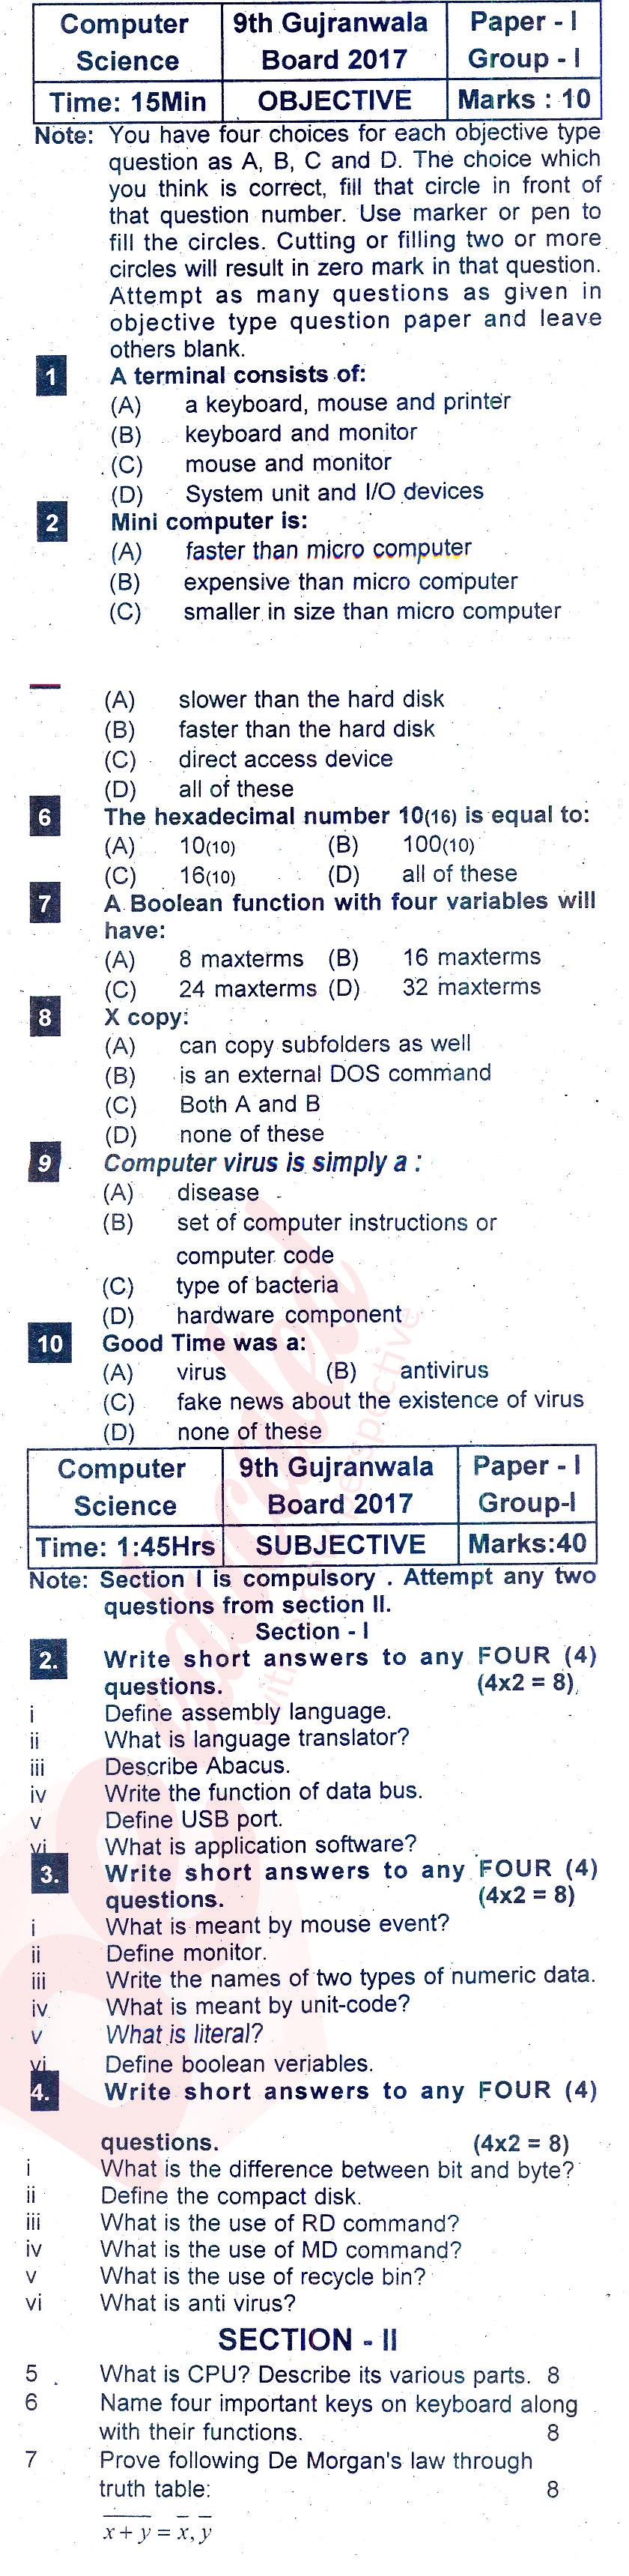 Computer Science 9th English Medium Past Paper Group 1 BISE Gujranwala 2017